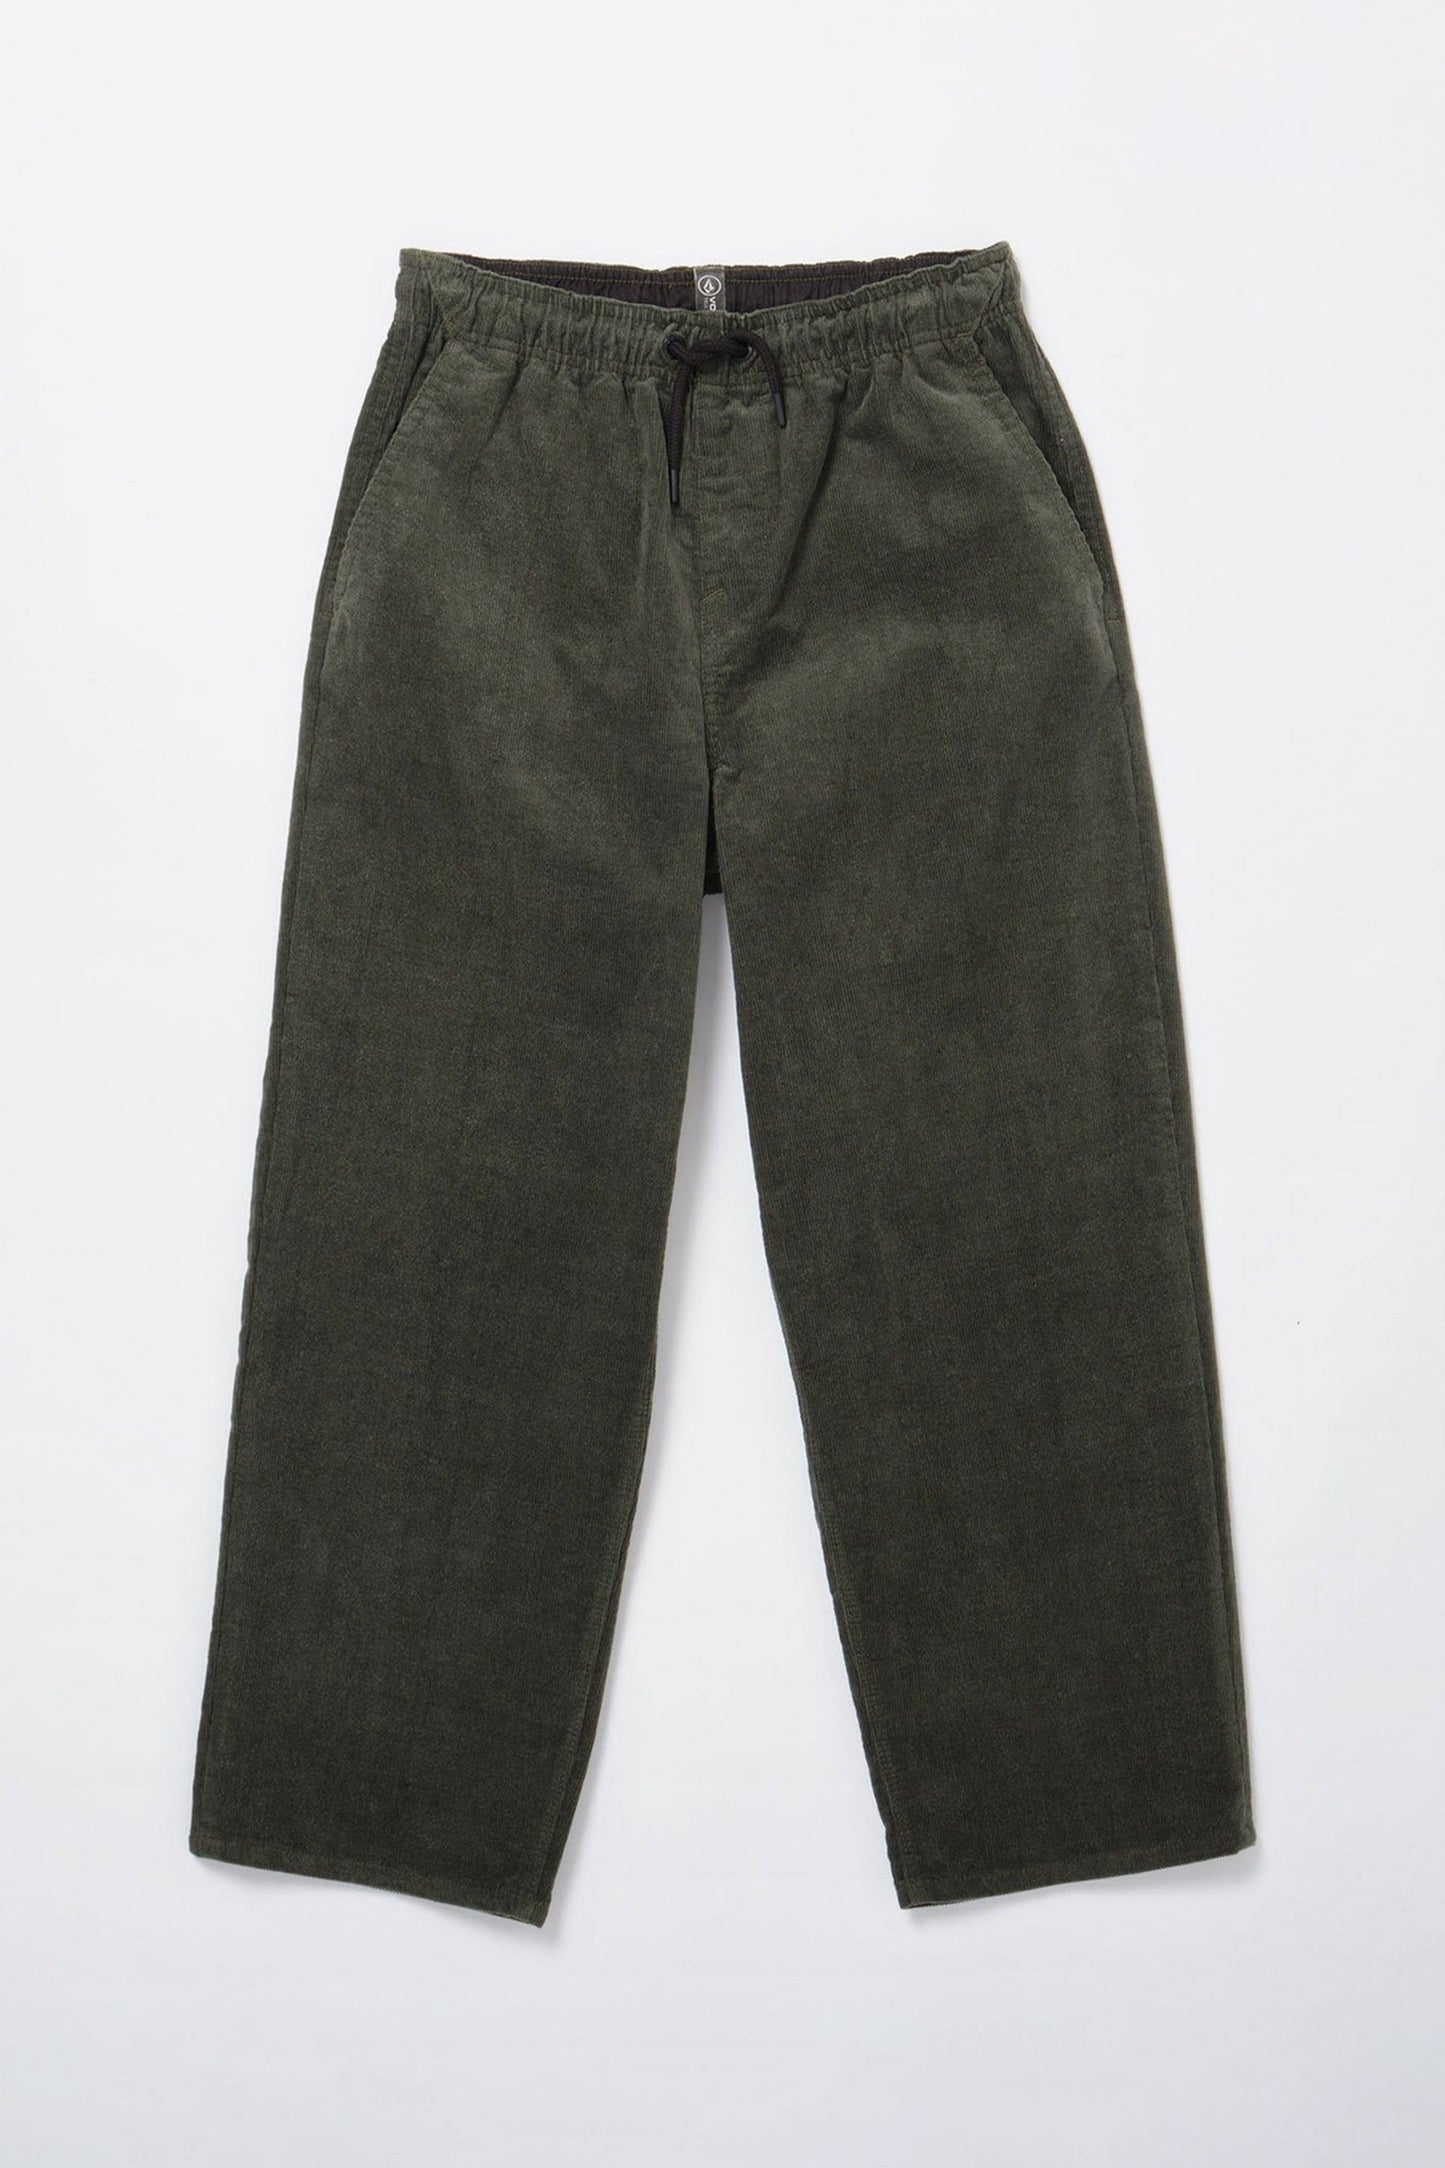     Pukas-Surf-Shop-Volcom-Pants-Outer-Spaced-Green